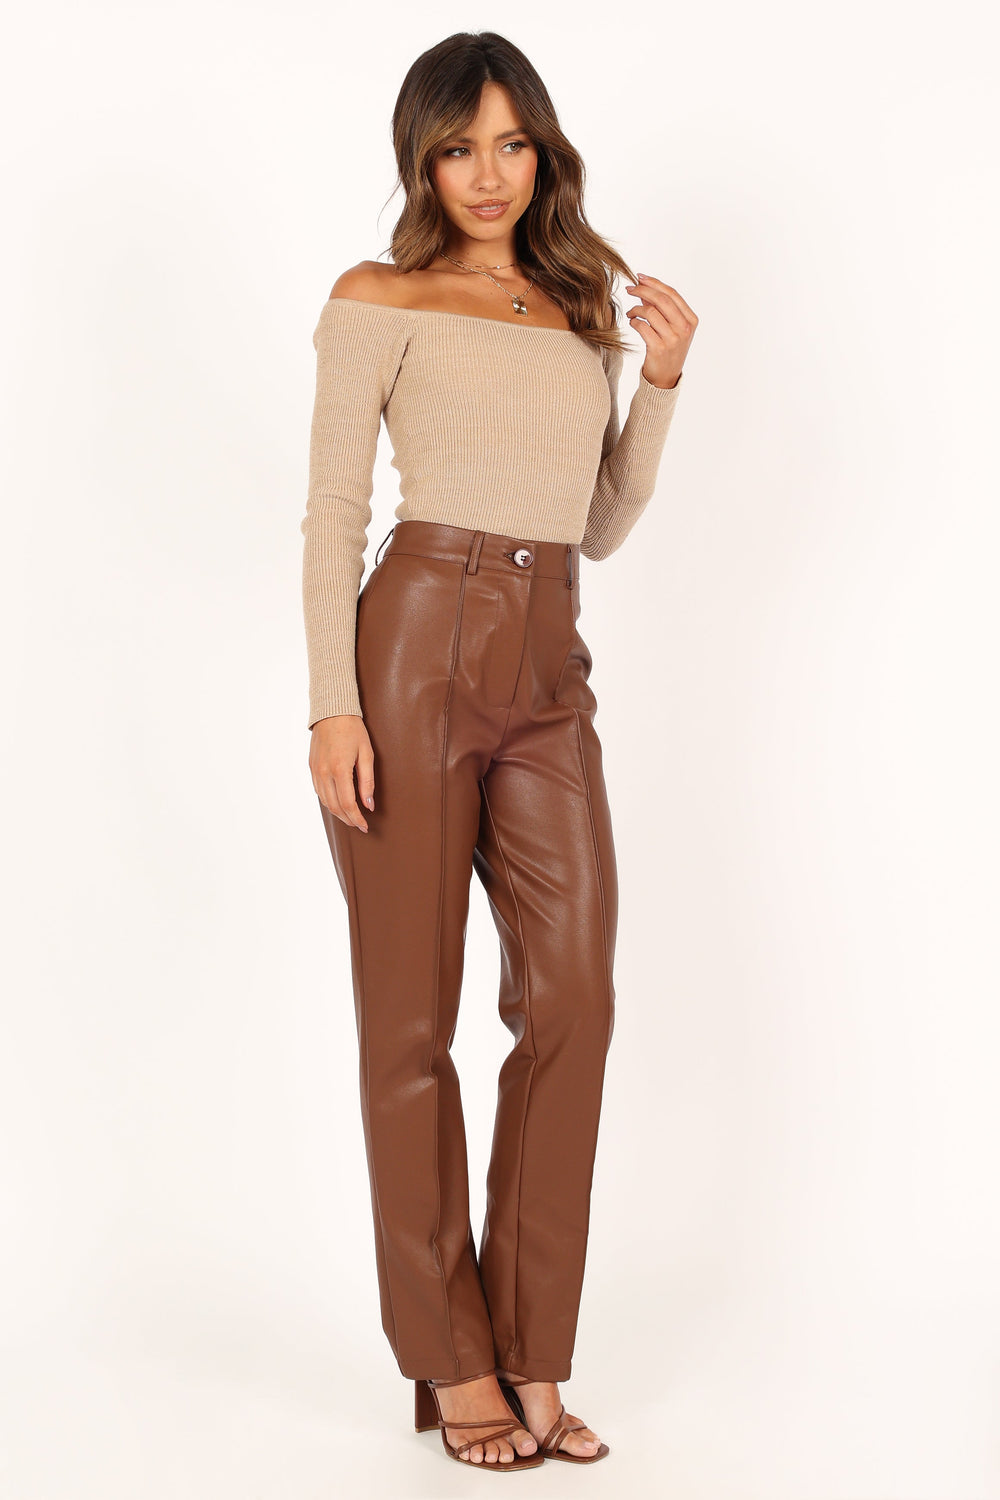 Dilyenne Pant - Mid Waist Straight Leg Faux Leather Pant in Chocolate |  Showpo